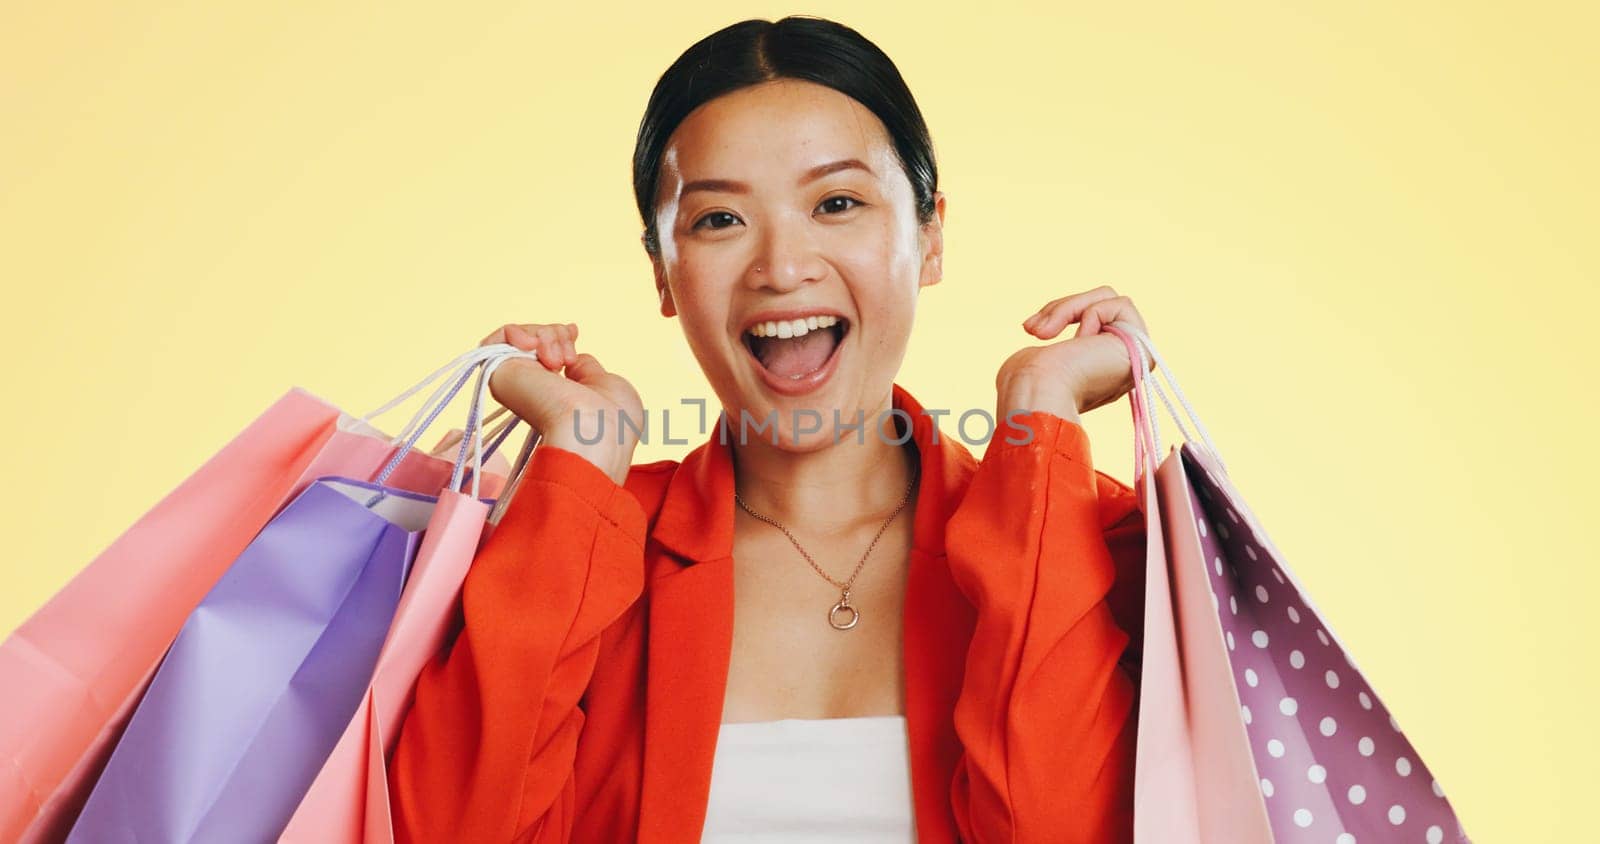 Happy, face and woman in studio with shopping, bag and boutique sale on yellow background. Portrait, excited and asian girl shopper customer with items for discount, fun and retail while isolated.